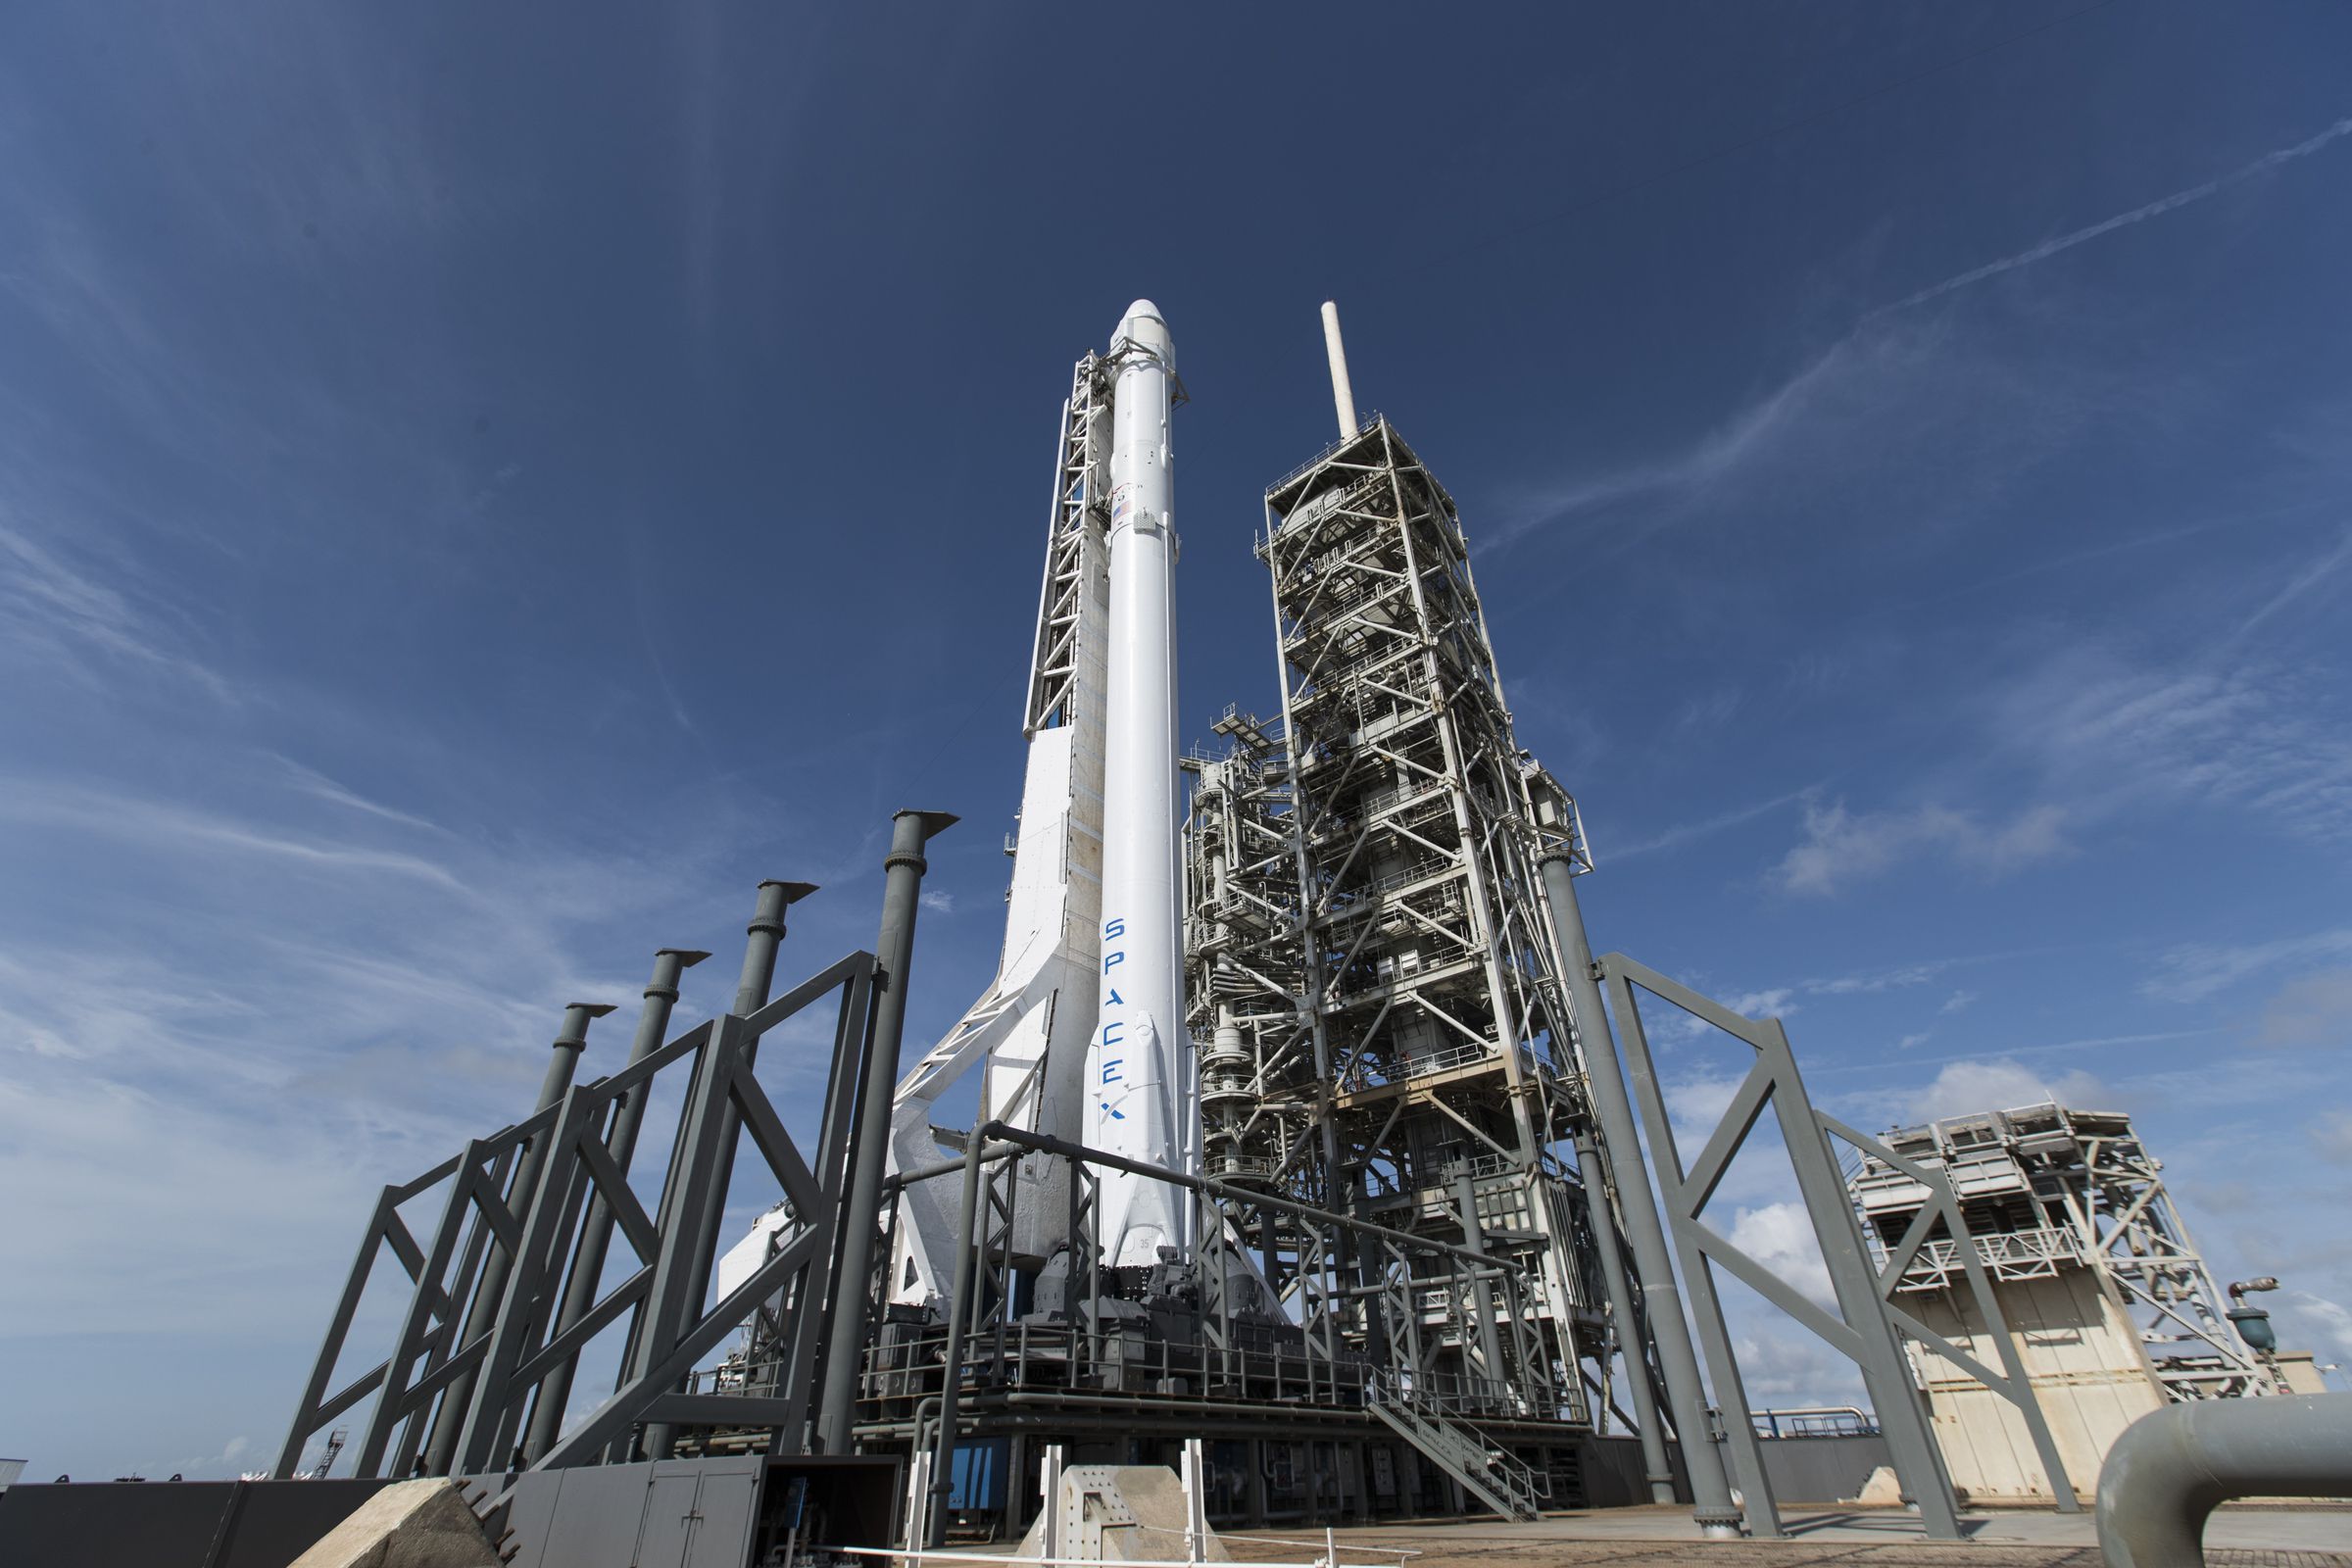 SpaceX’s Falcon 9 rocket, prior to the launch of a cargo resupply mission in June